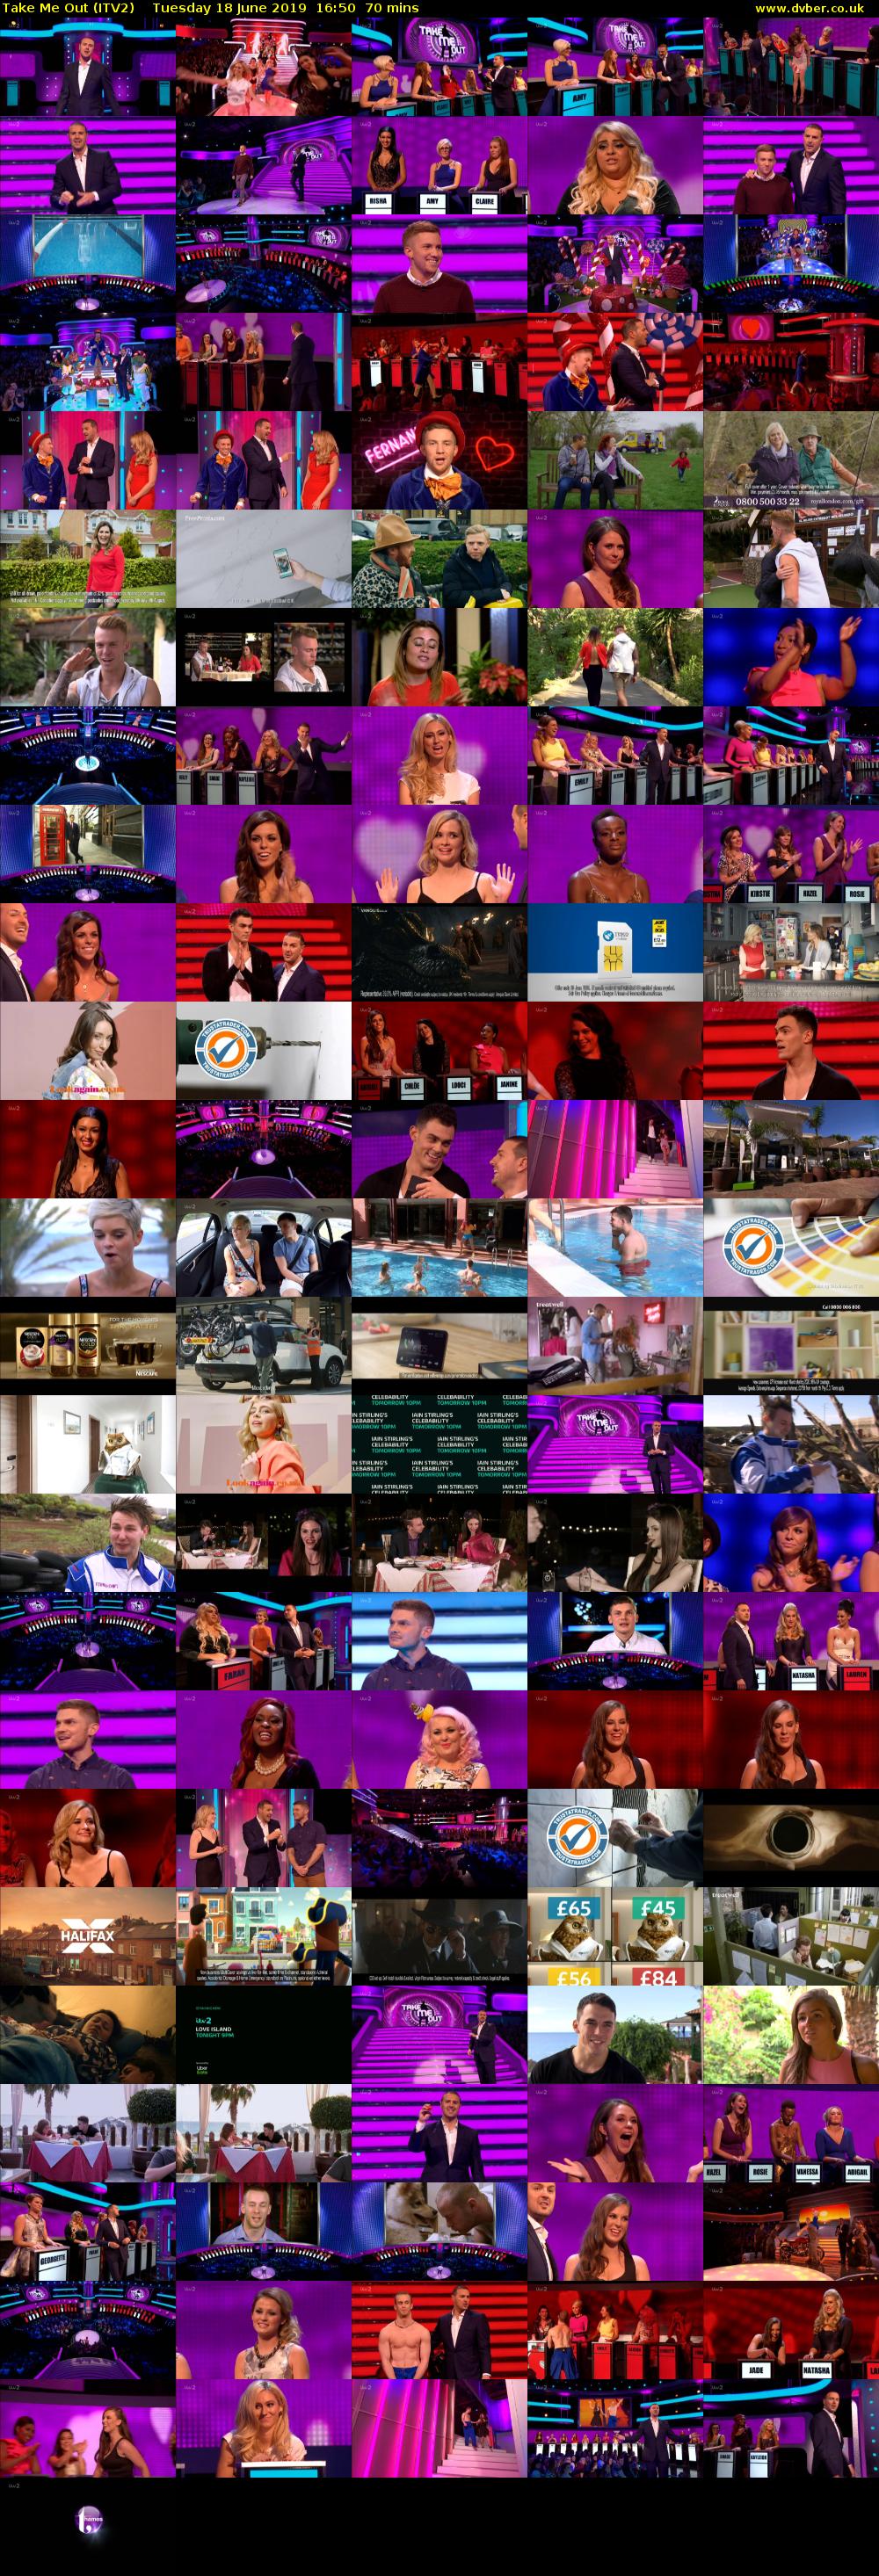 Take Me Out (ITV2) Tuesday 18 June 2019 16:50 - 18:00